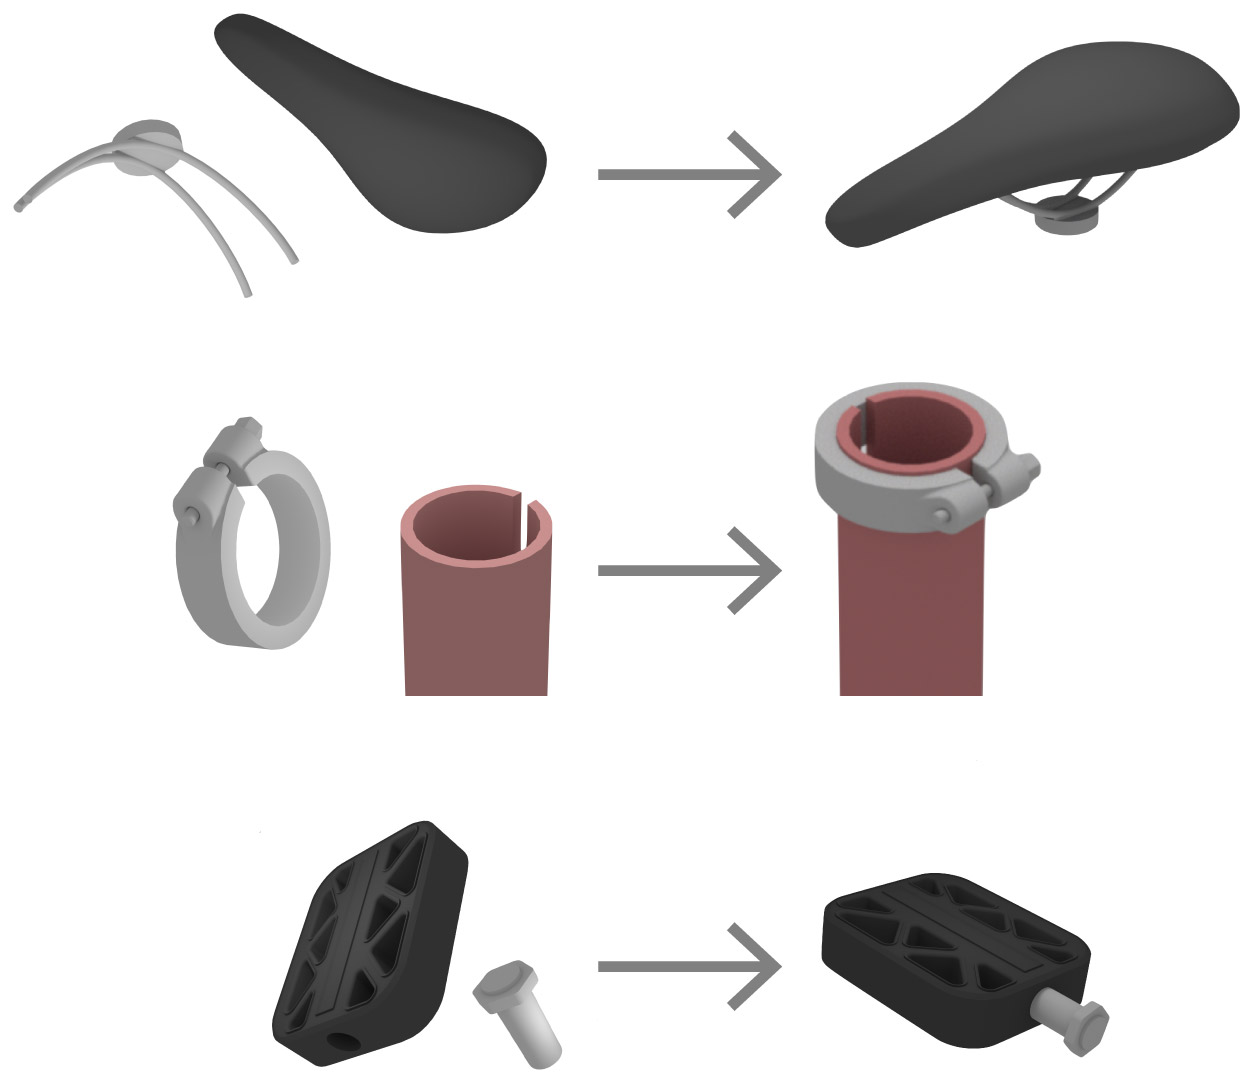 JoinABLe automatically creates joints to assemble a pair of parts.